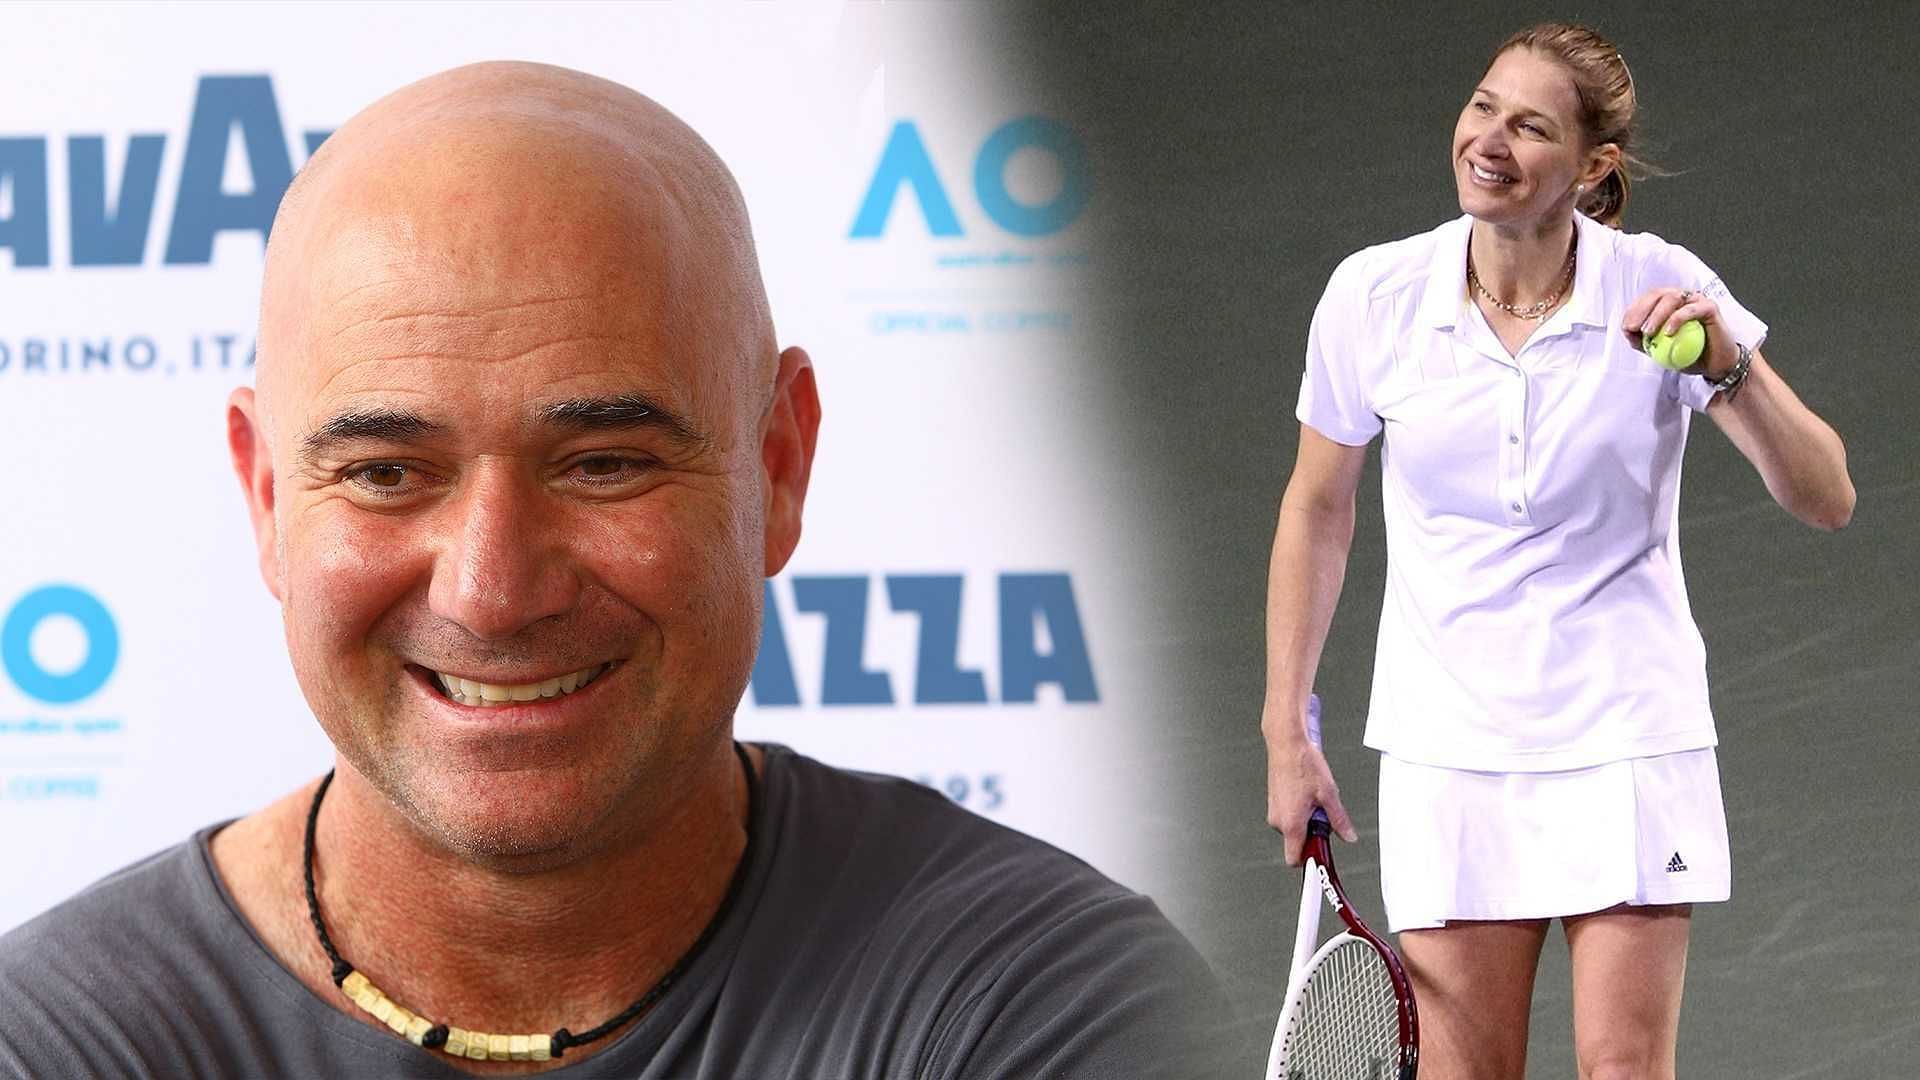 Andre Agassi once opened up on surpassing Steffi Graf